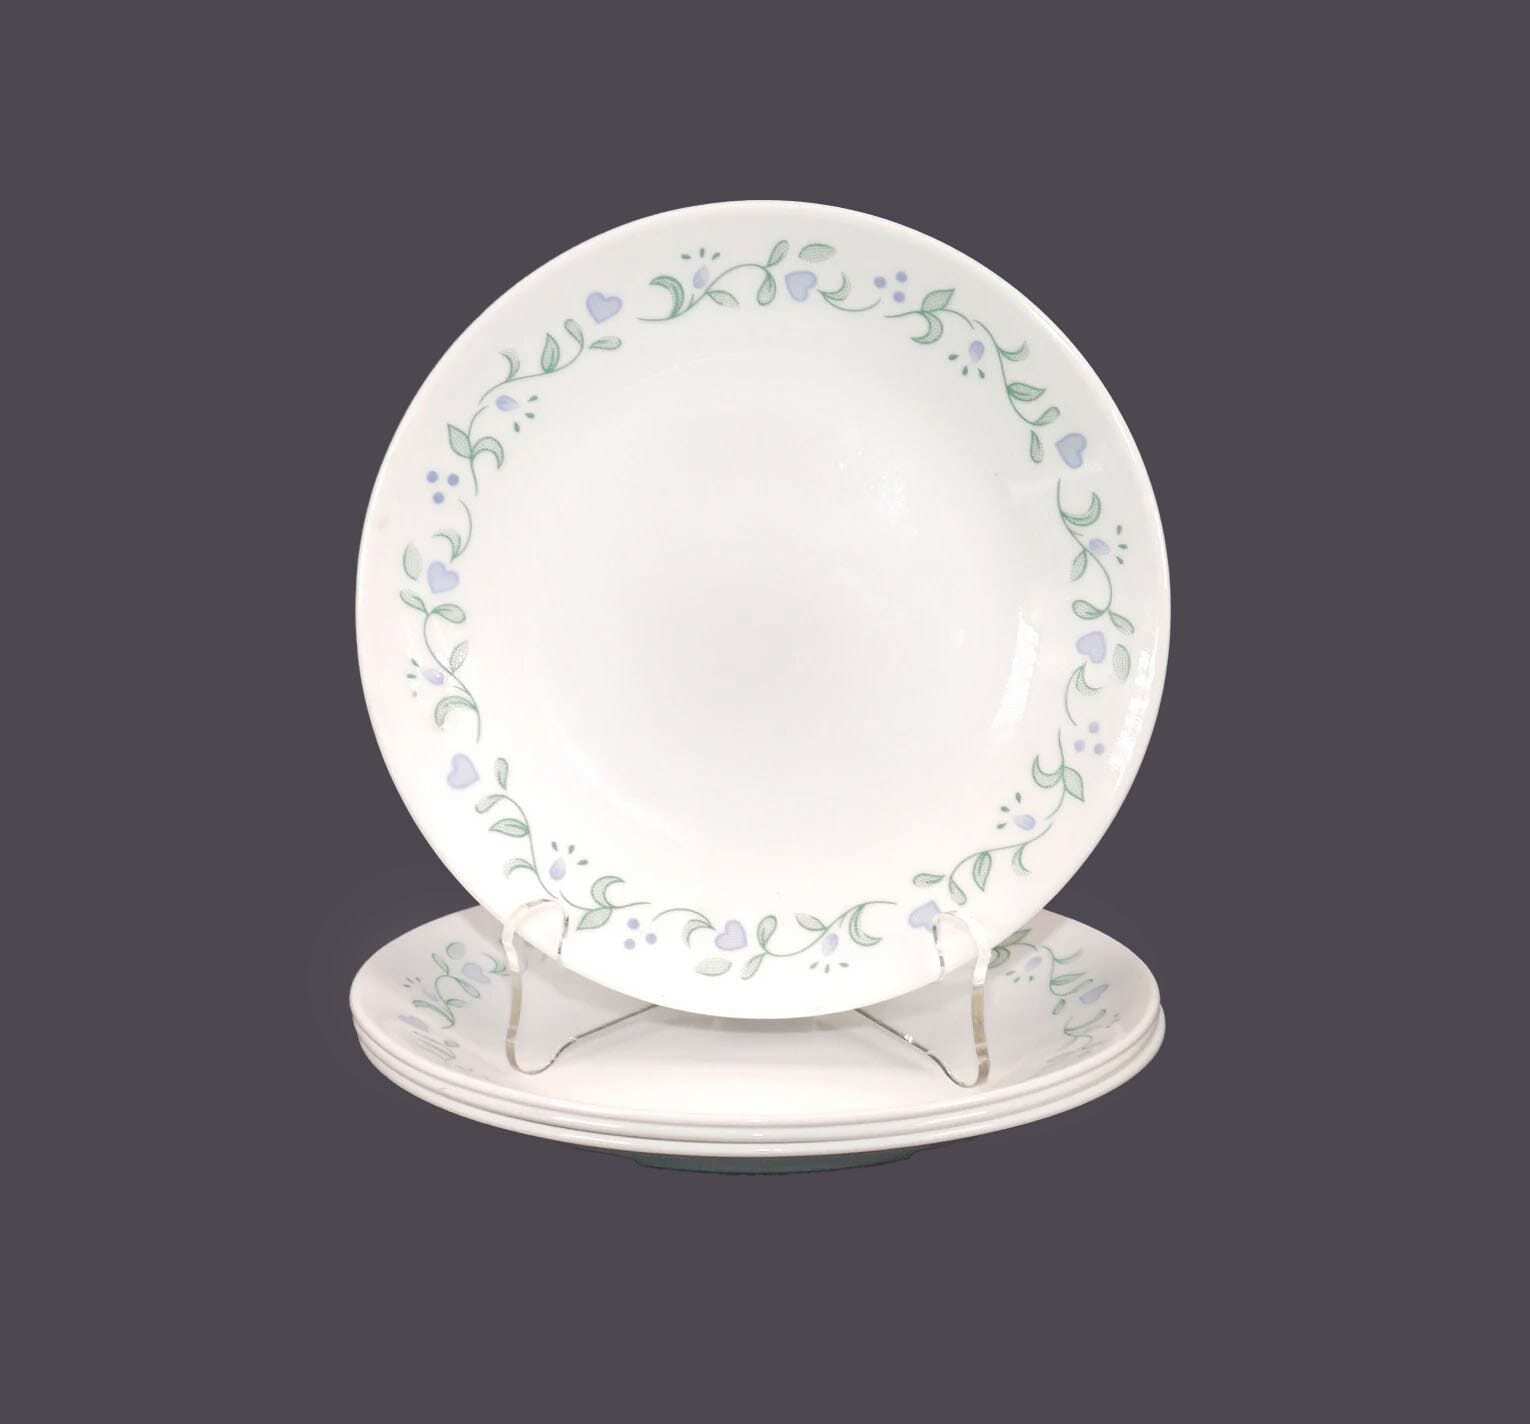 Corelle Country Cottage bread plates. Vintage Corningware made in the USA. - £42.60 GBP - £50.35 GBP